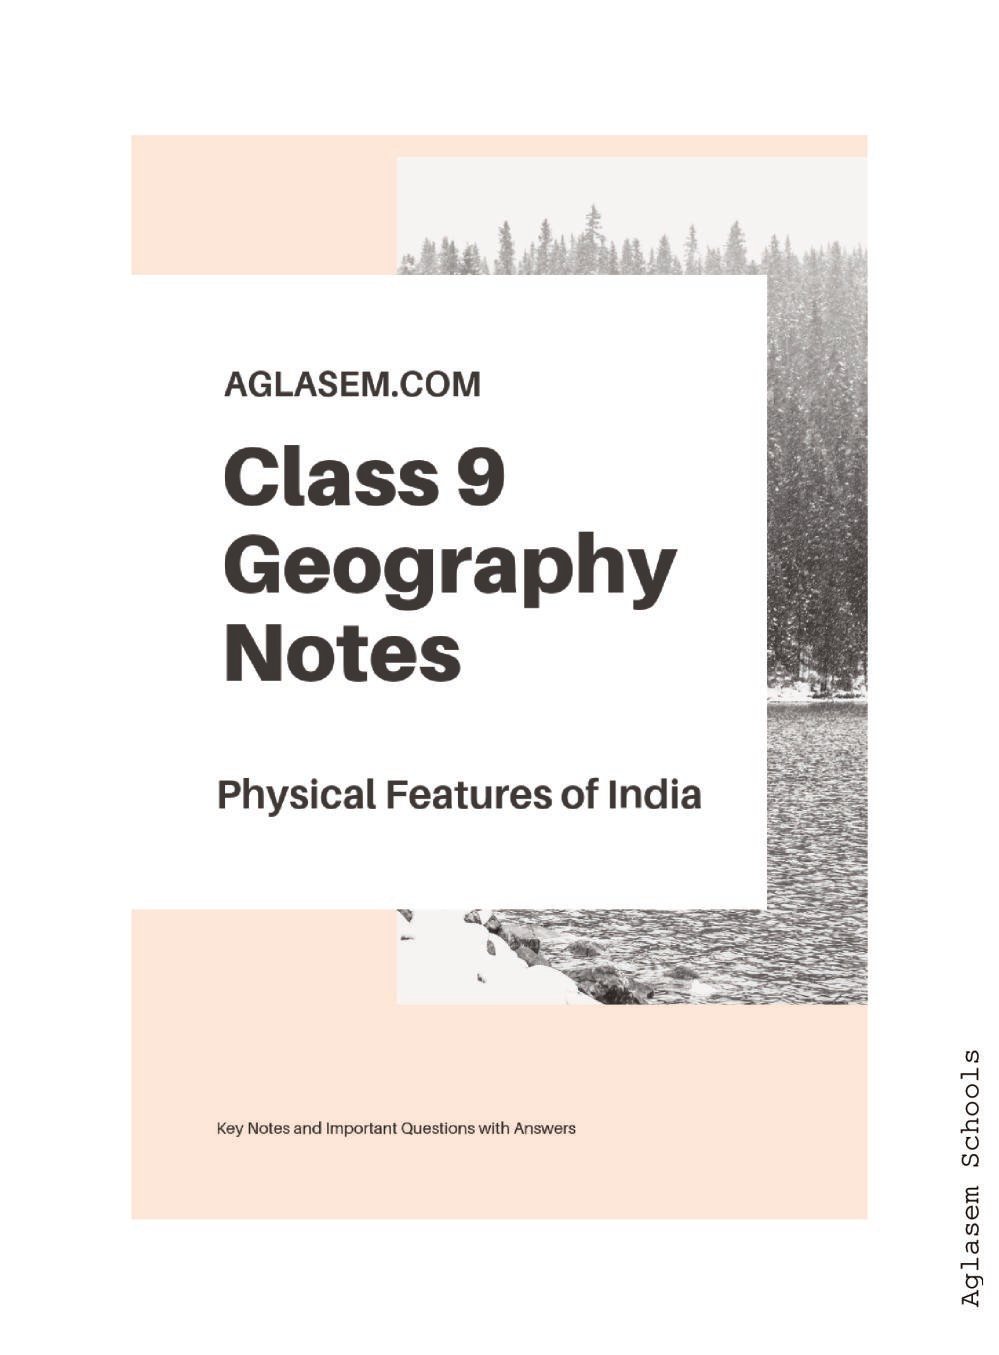 Class 9 Social Science Geography Notes for Physical Features of India - Page 1